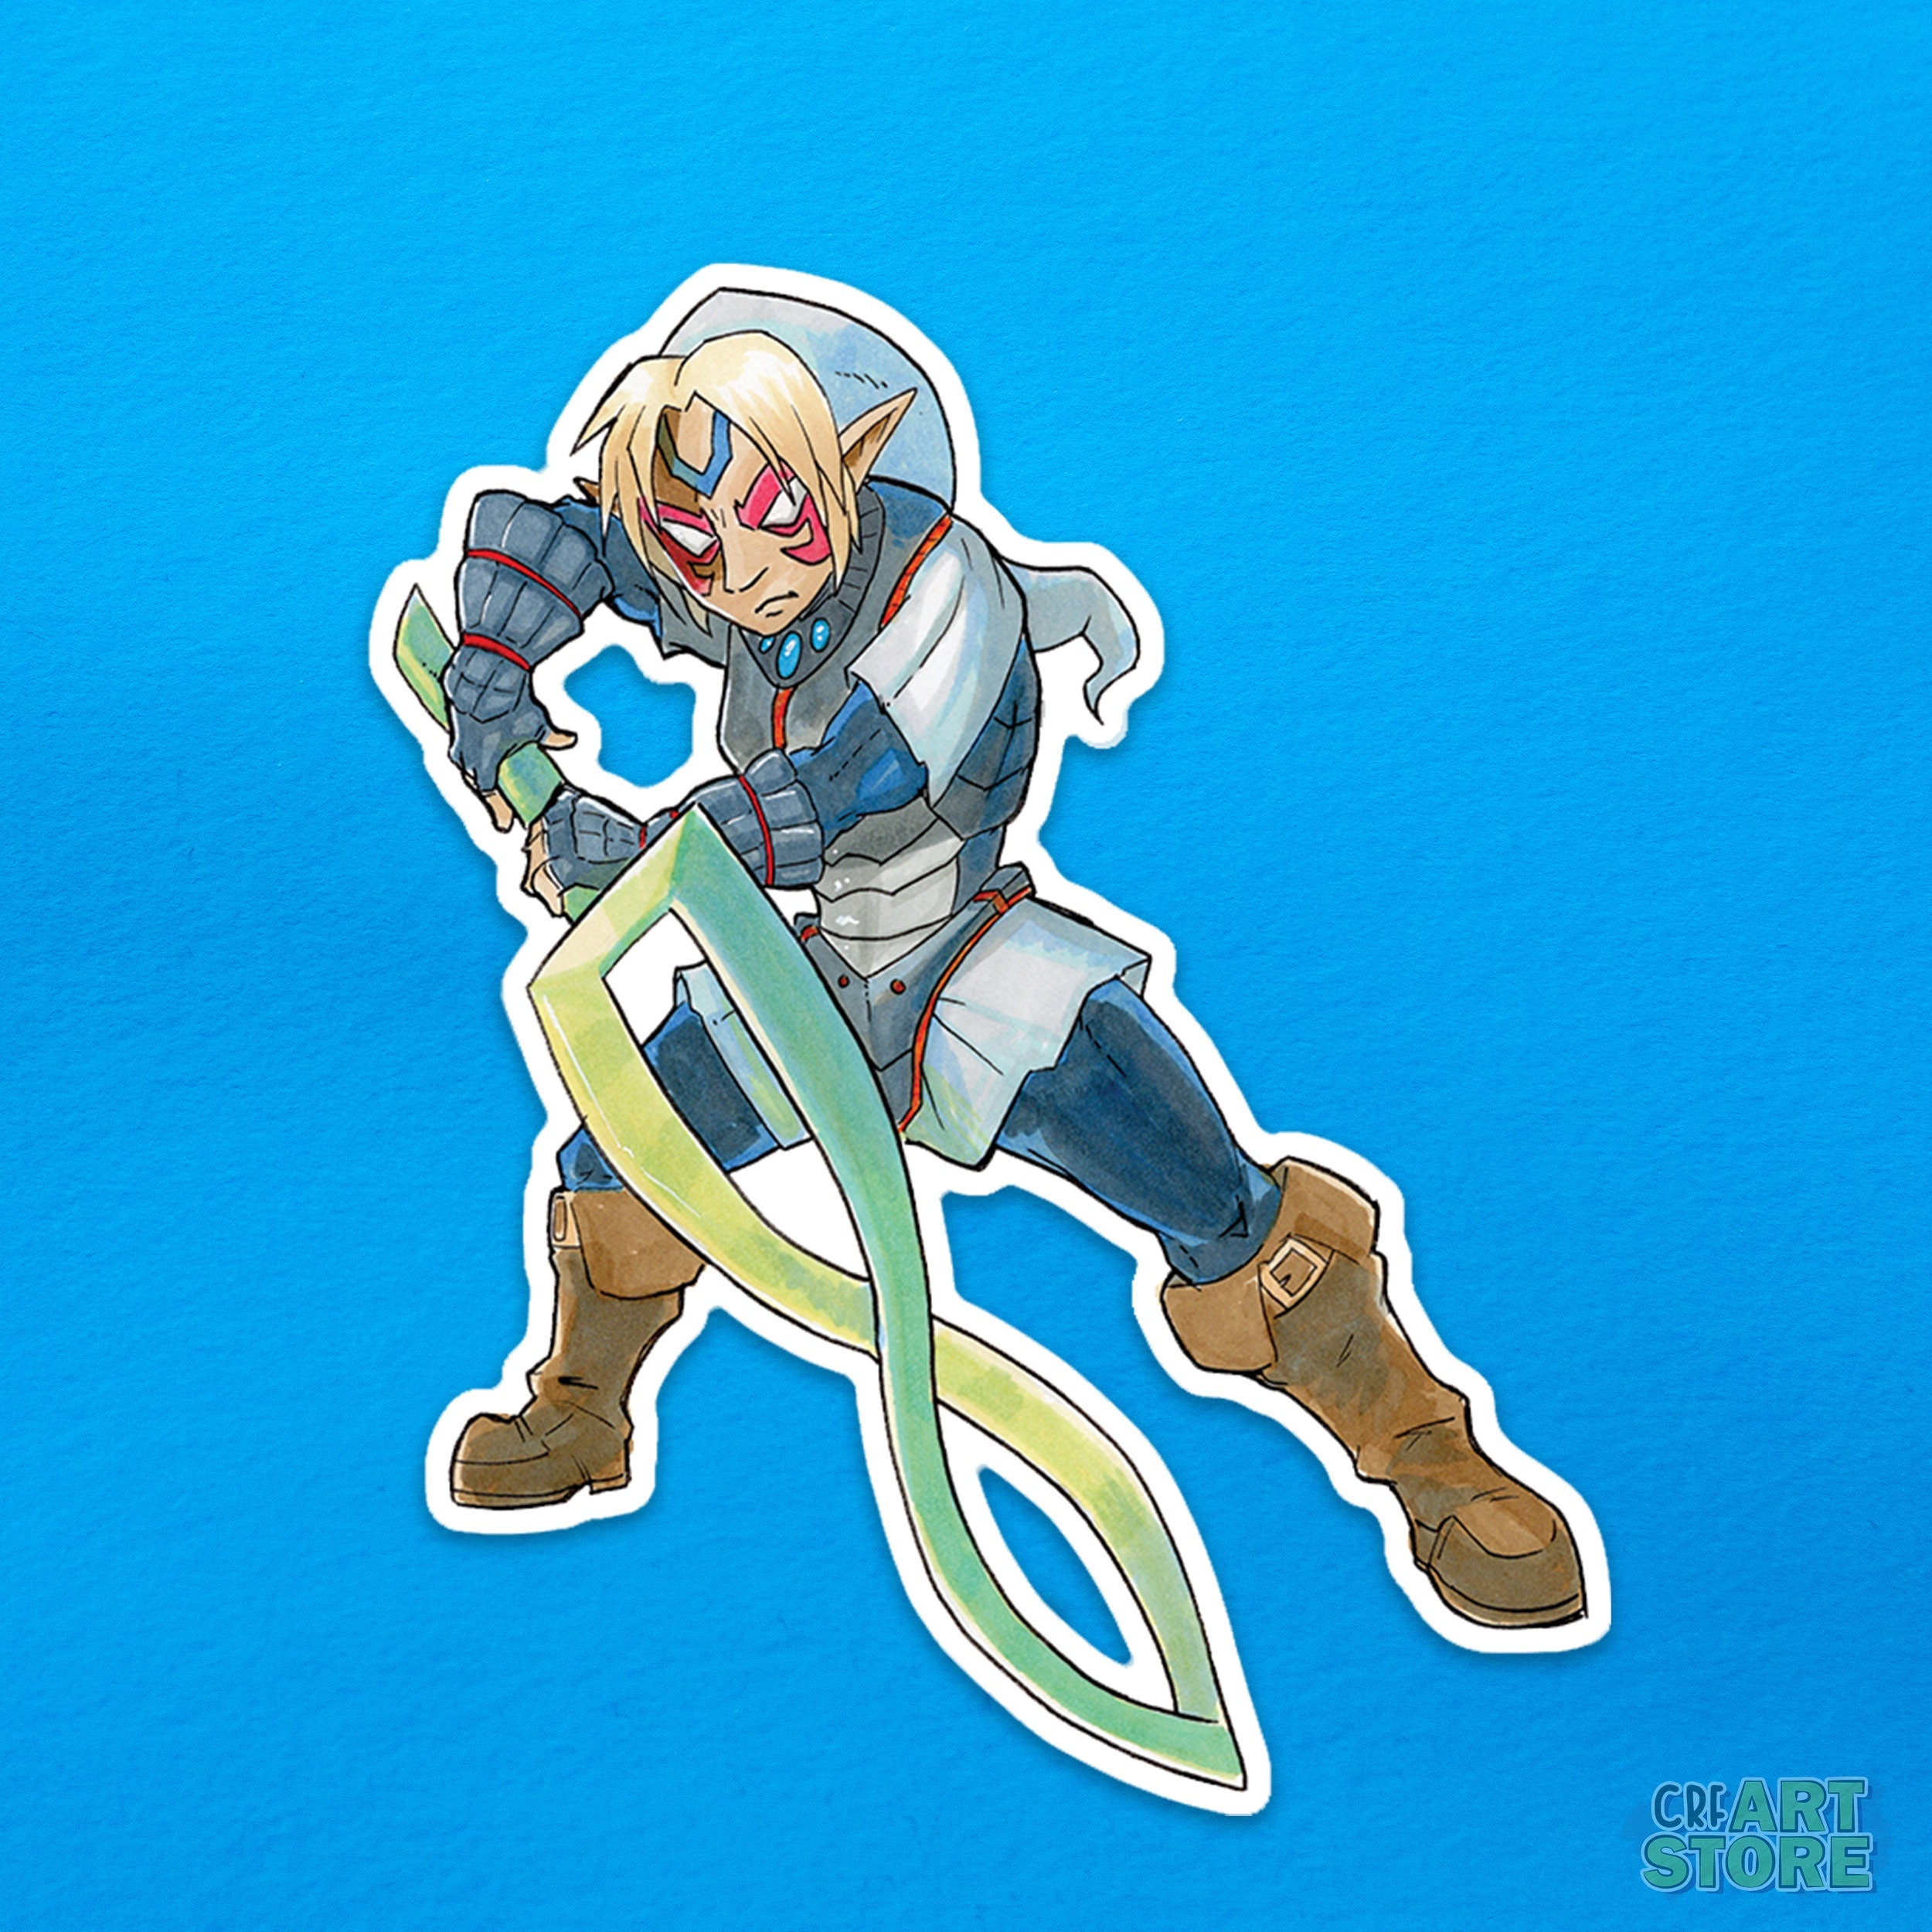 Which is My Favourite Link Incarnation from The Legend of Zelda Series?